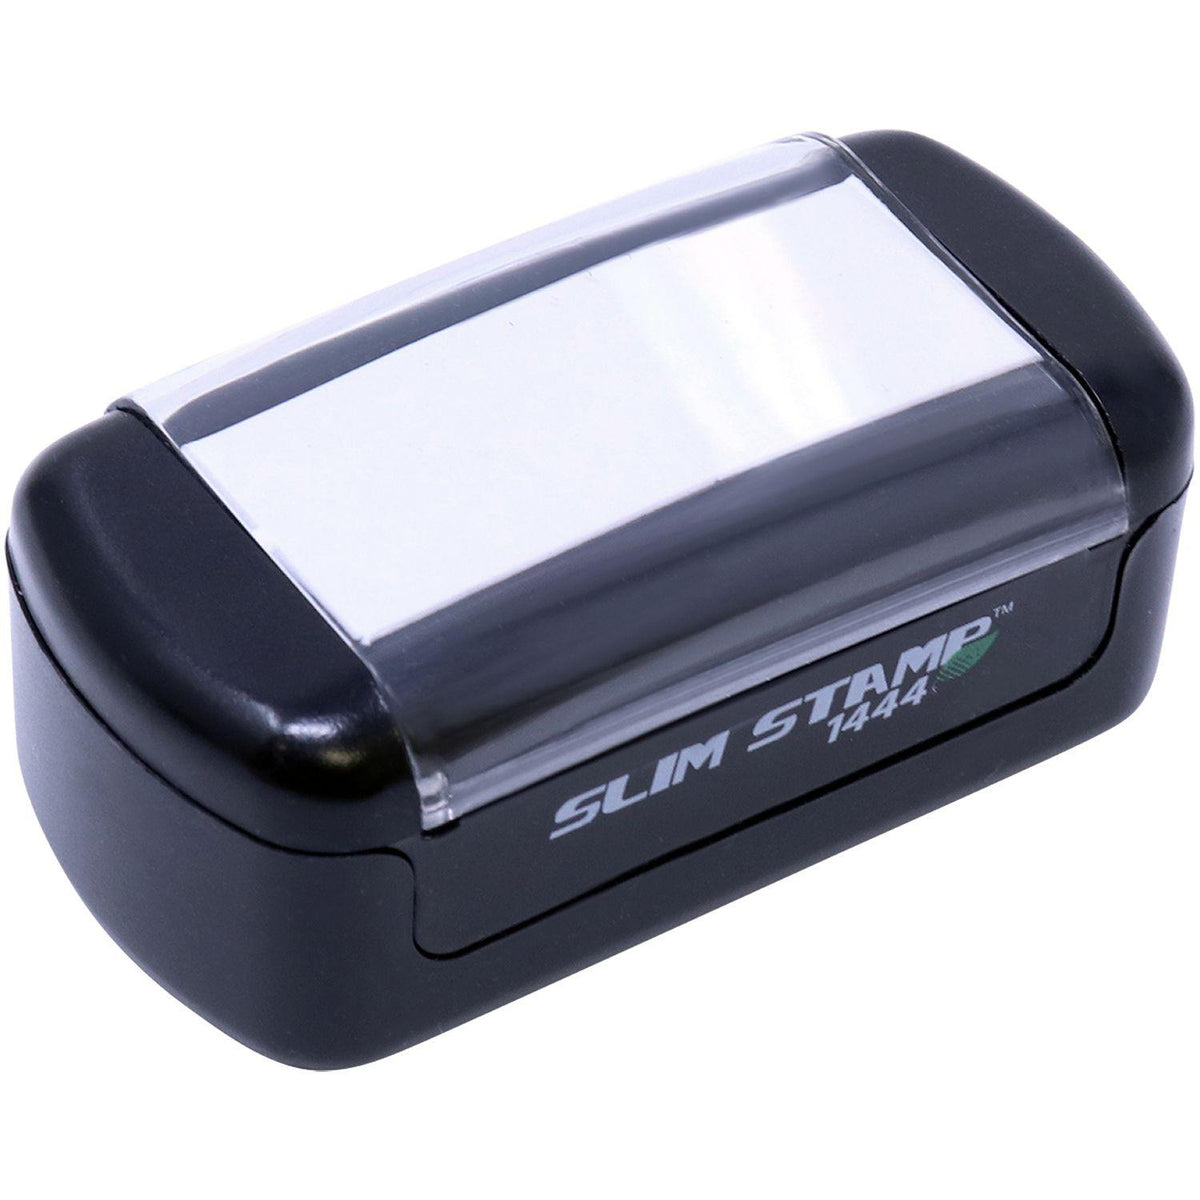 Slim Pre-Inked Bravo with Hands Stamp - Engineer Seal Stamps - Brand_Slim, Impression Size_Small, Stamp Type_Pre-Inked Stamp, Type of Use_Teacher